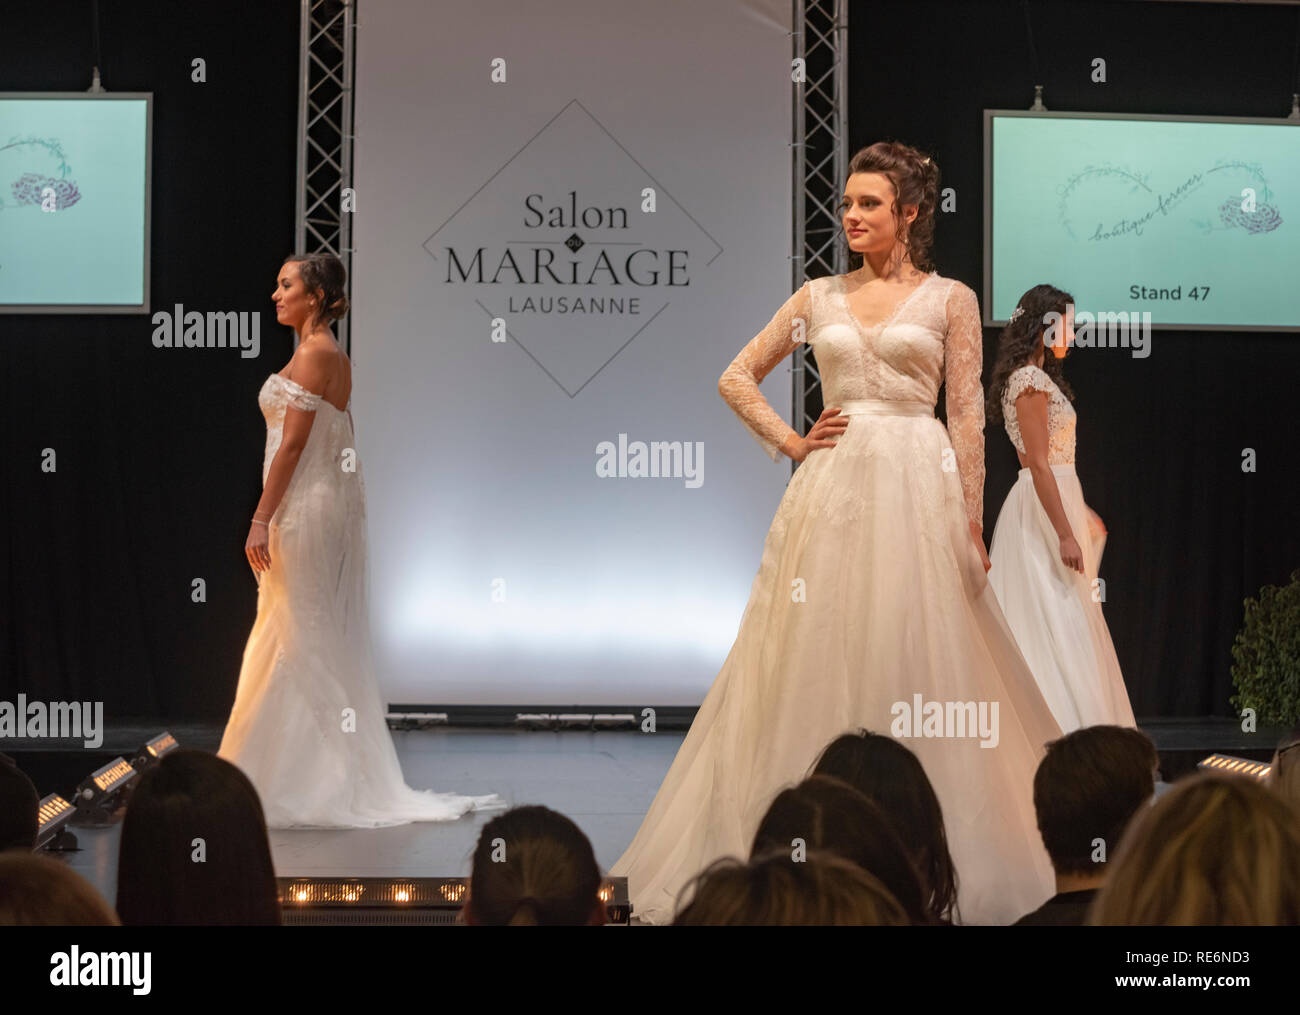 Lausanne, Switzerland. 20th Jan, 2019. Model wearing the new wedding solemn wedding dress collection 2019 at the Baulieu Expo in Lausanne, in Switzerland. Lausanne, Switzerland on the 20 th January, 2019. Credit: Eric Dubost/Alamy Live News. Stock Photo